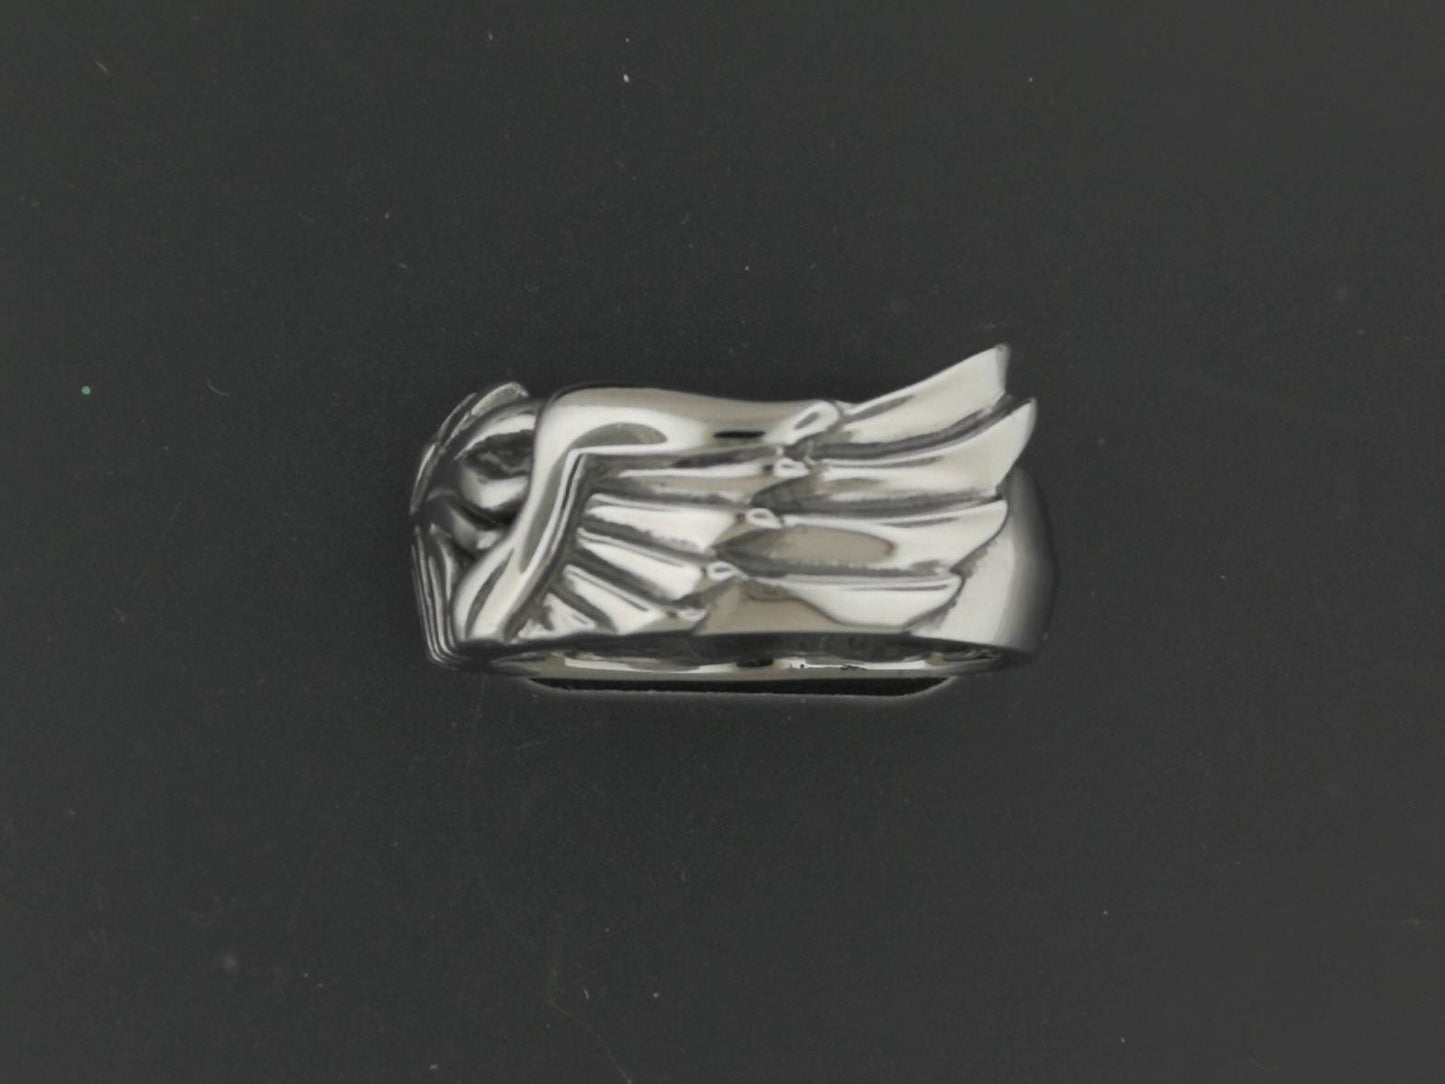 Final Fantasy 8 Squall Griever Ring in Stainless Steel